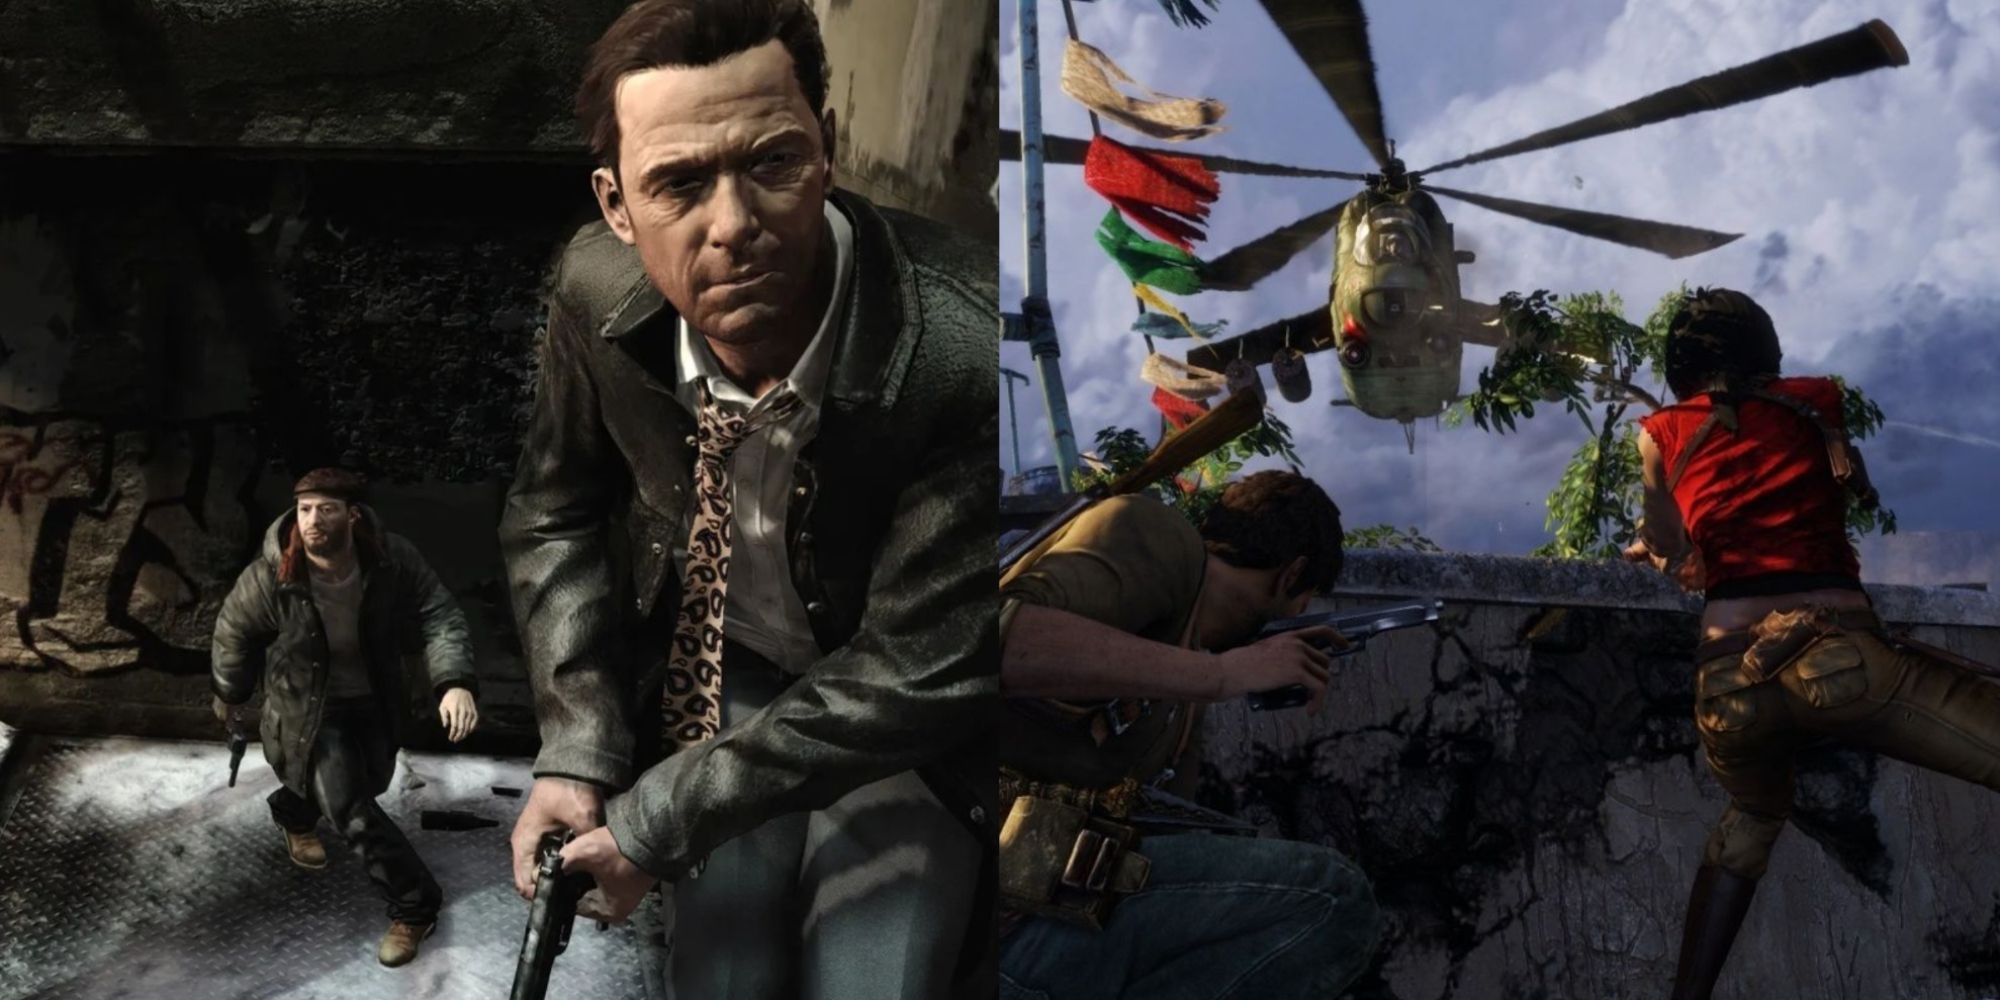 Best PS3 Action Games Featured Split Image Max Payne 3 and Uncharted 2